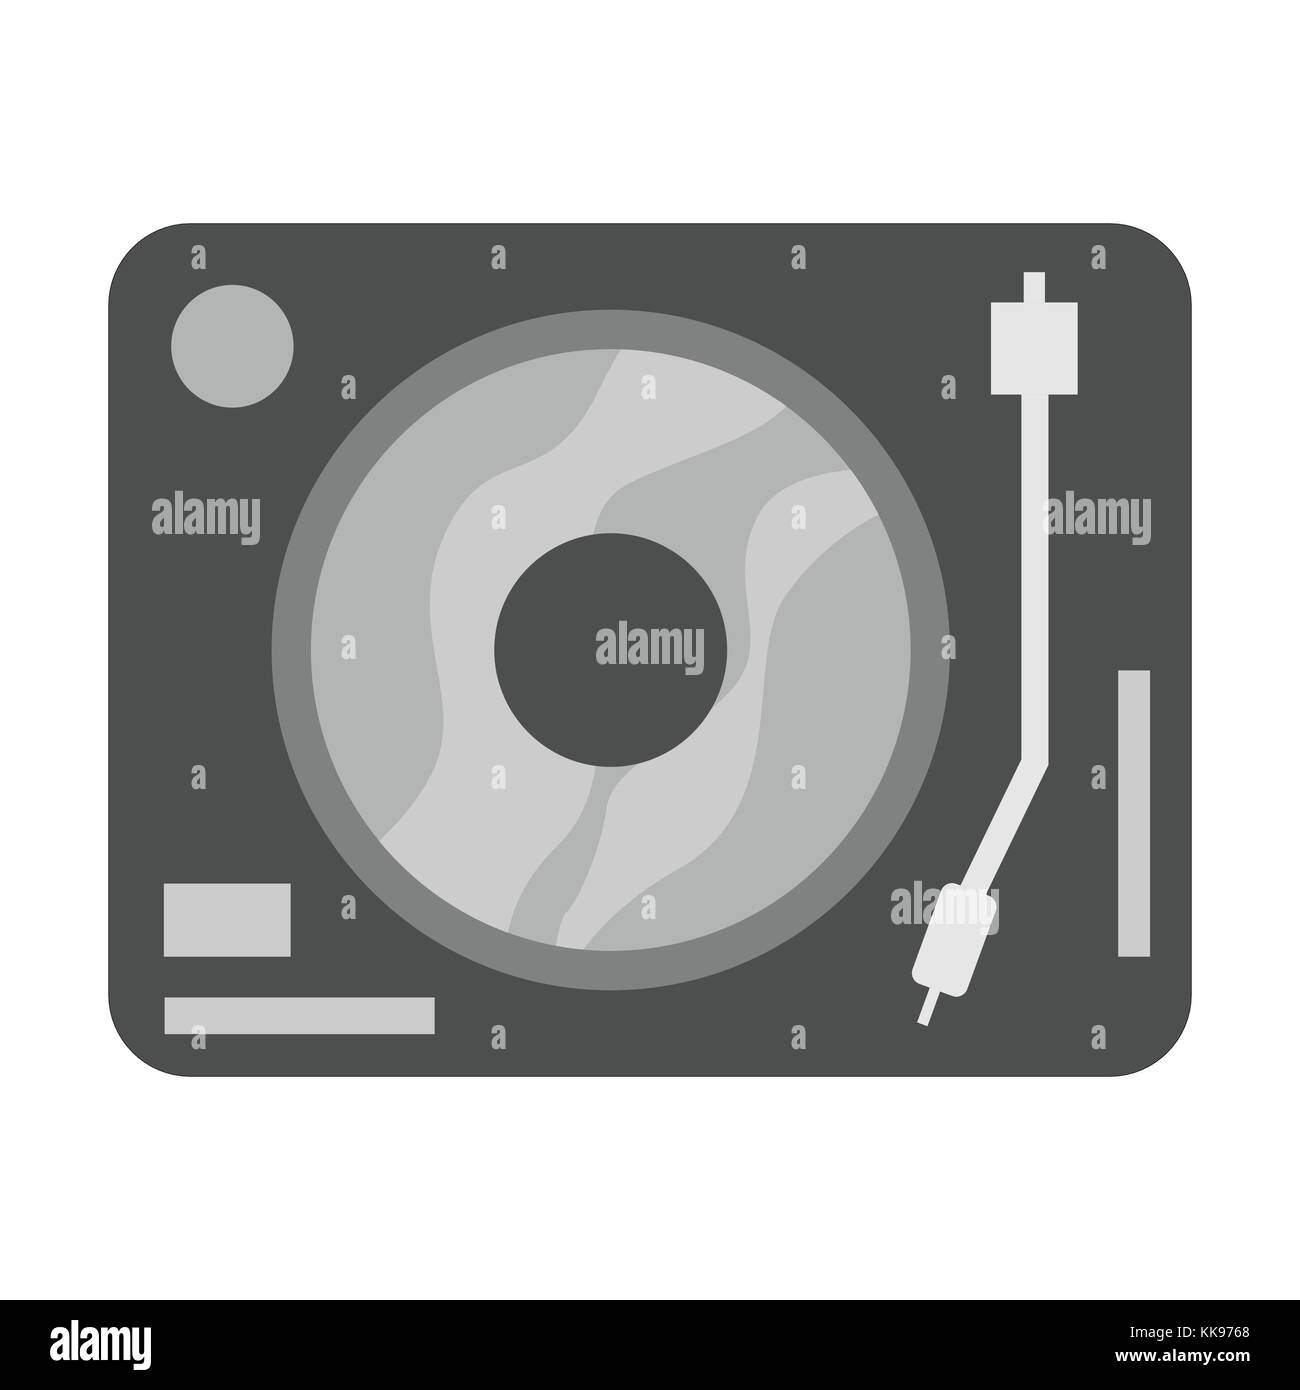 turntable graphic vector